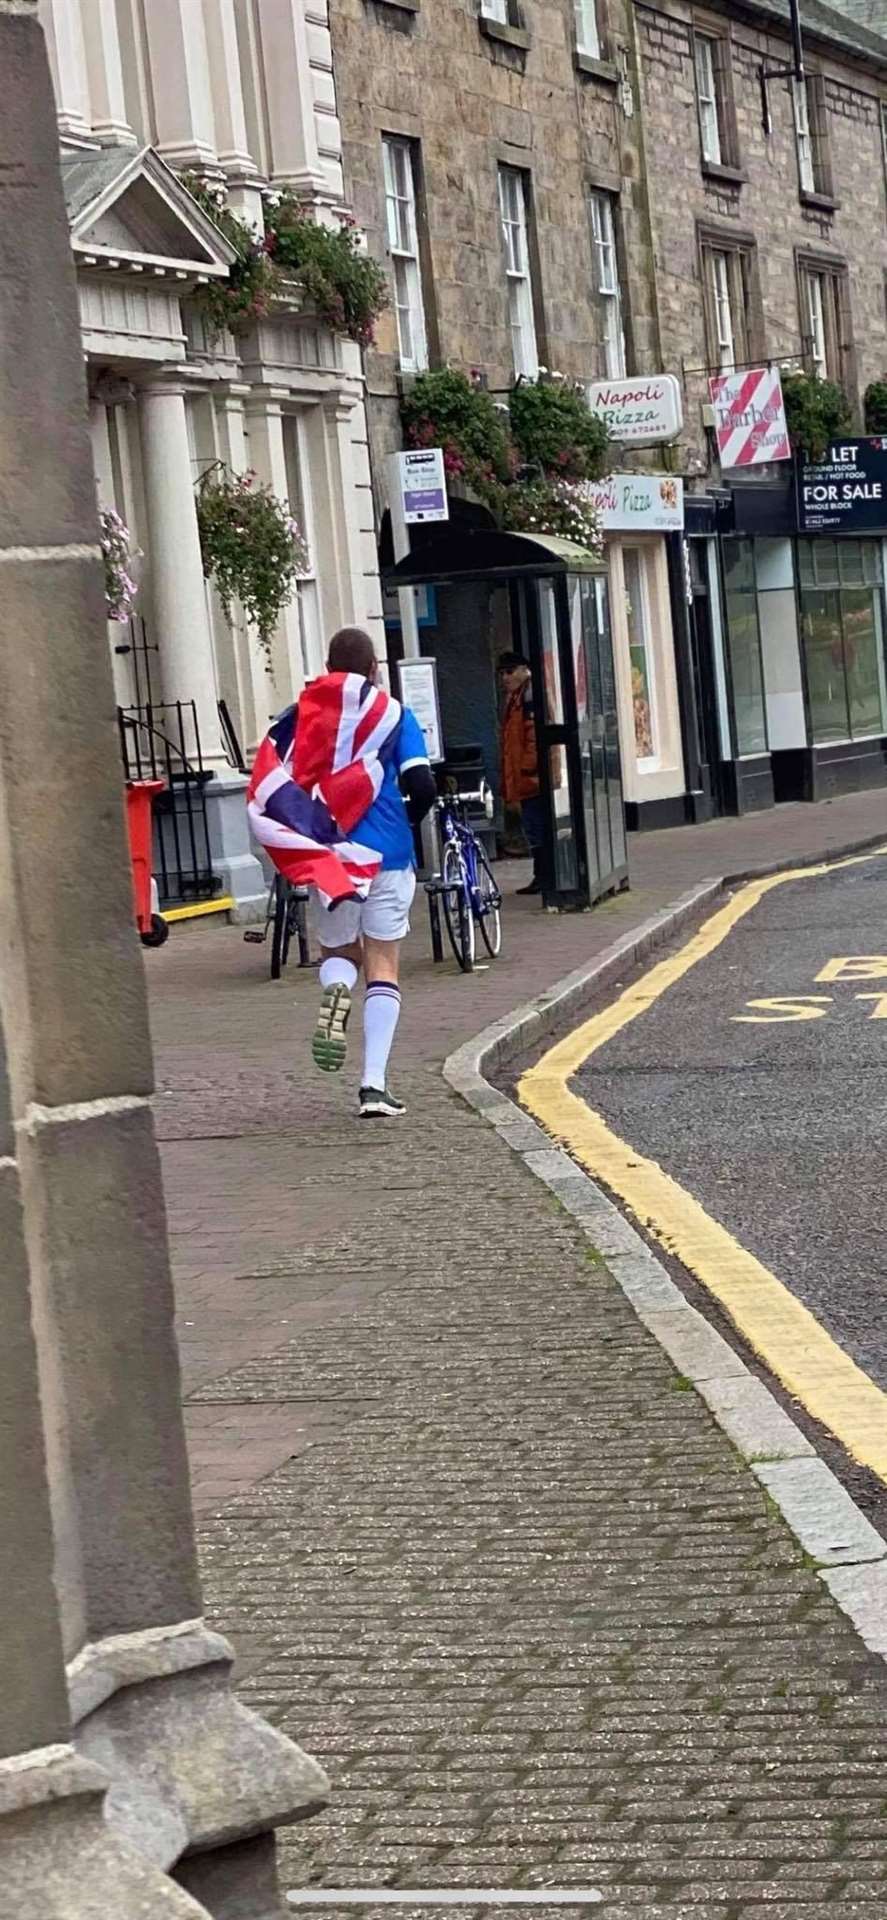 Kye parading the red, white and blue of Rangers through the high street.